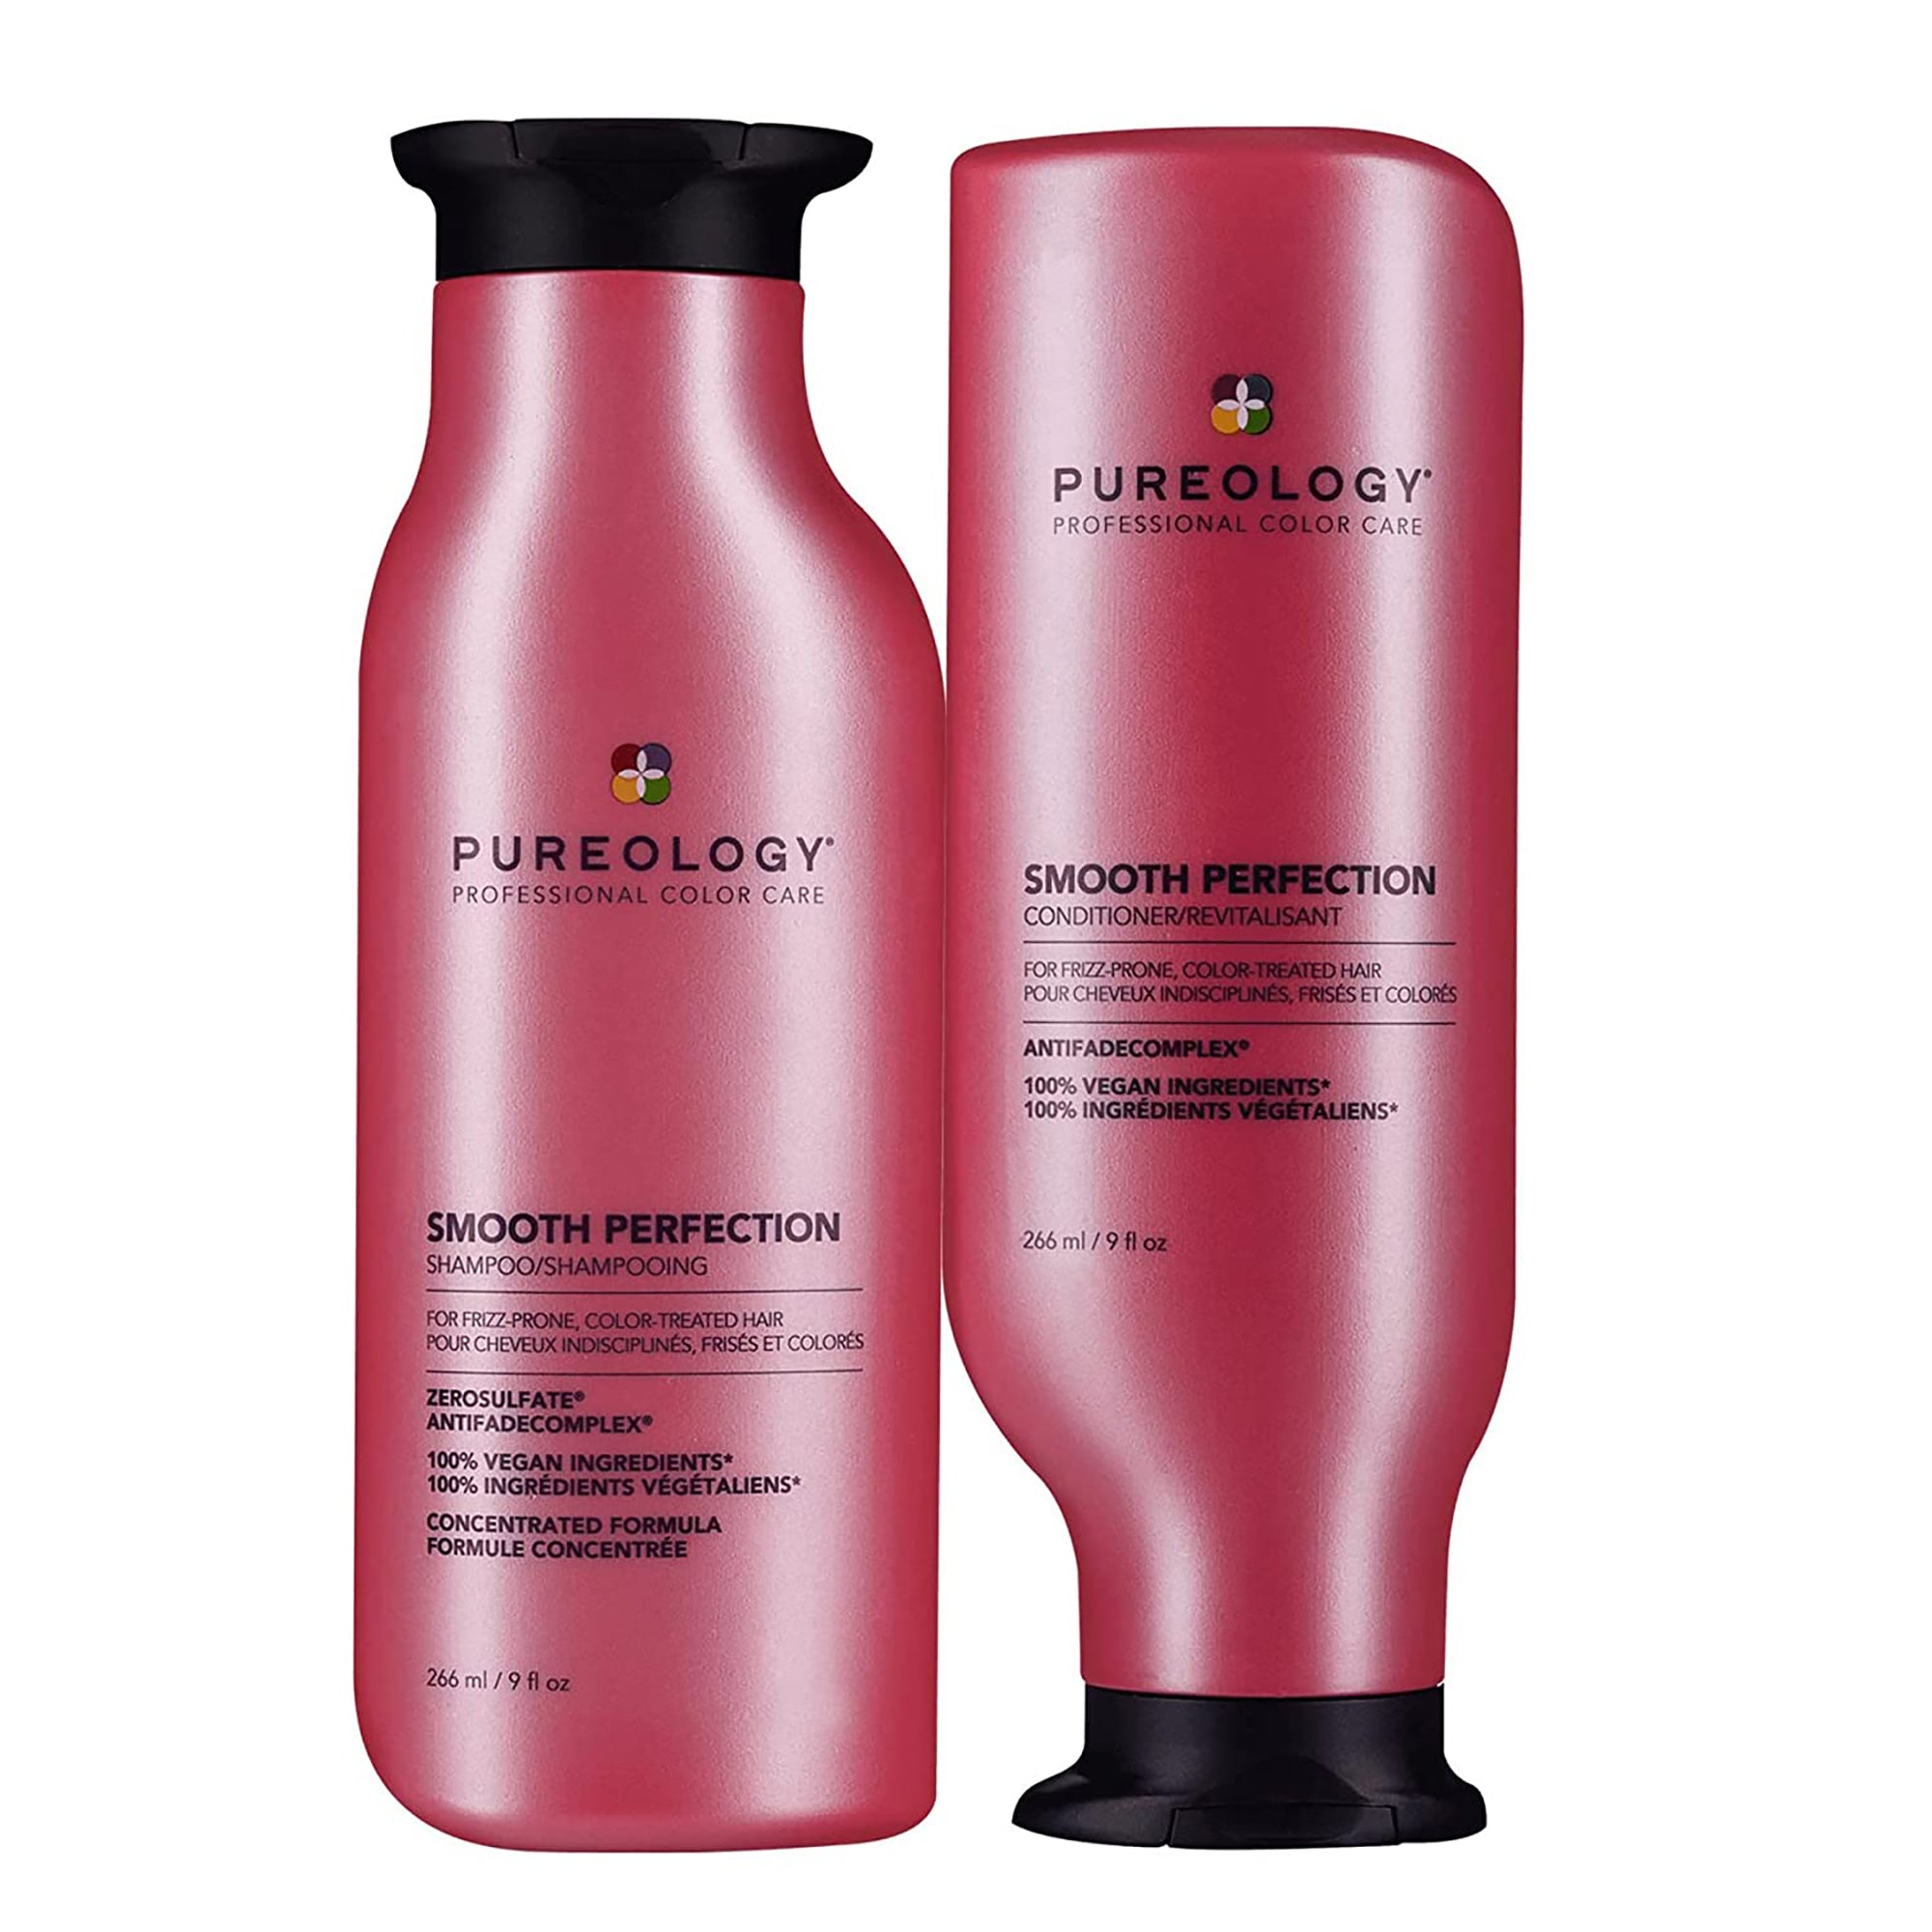 Pureology Smooth Perfection Shampoo & Conditioner Duo / 9OZ